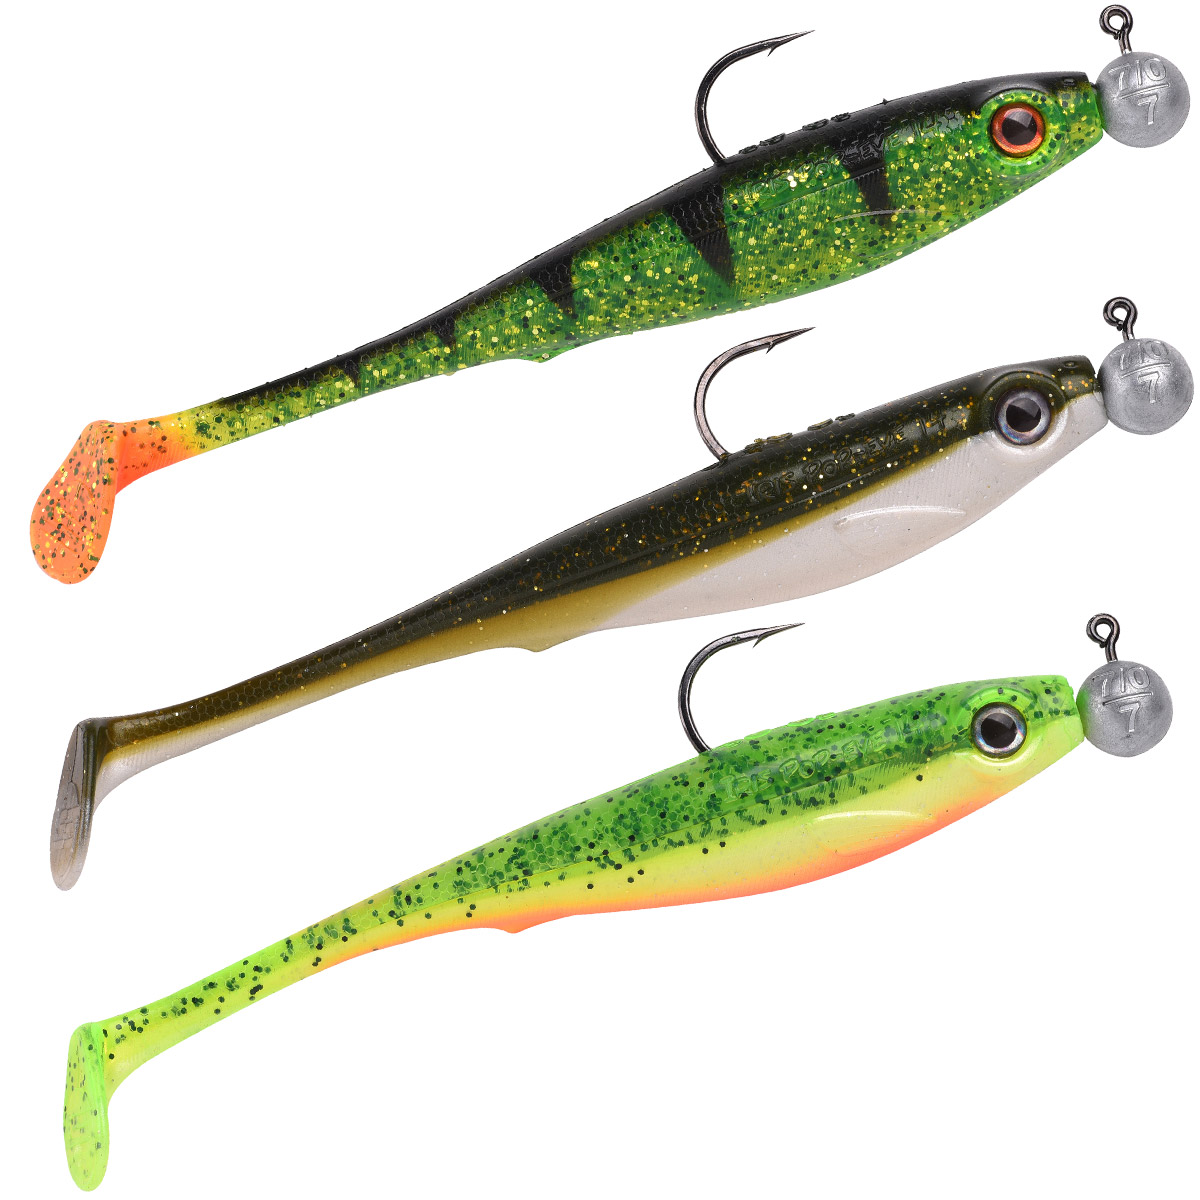 Spro Pop-Eye Softlures To Go Softlure 14 cm, Softbaits, Lures and Baits, Spin Fishing